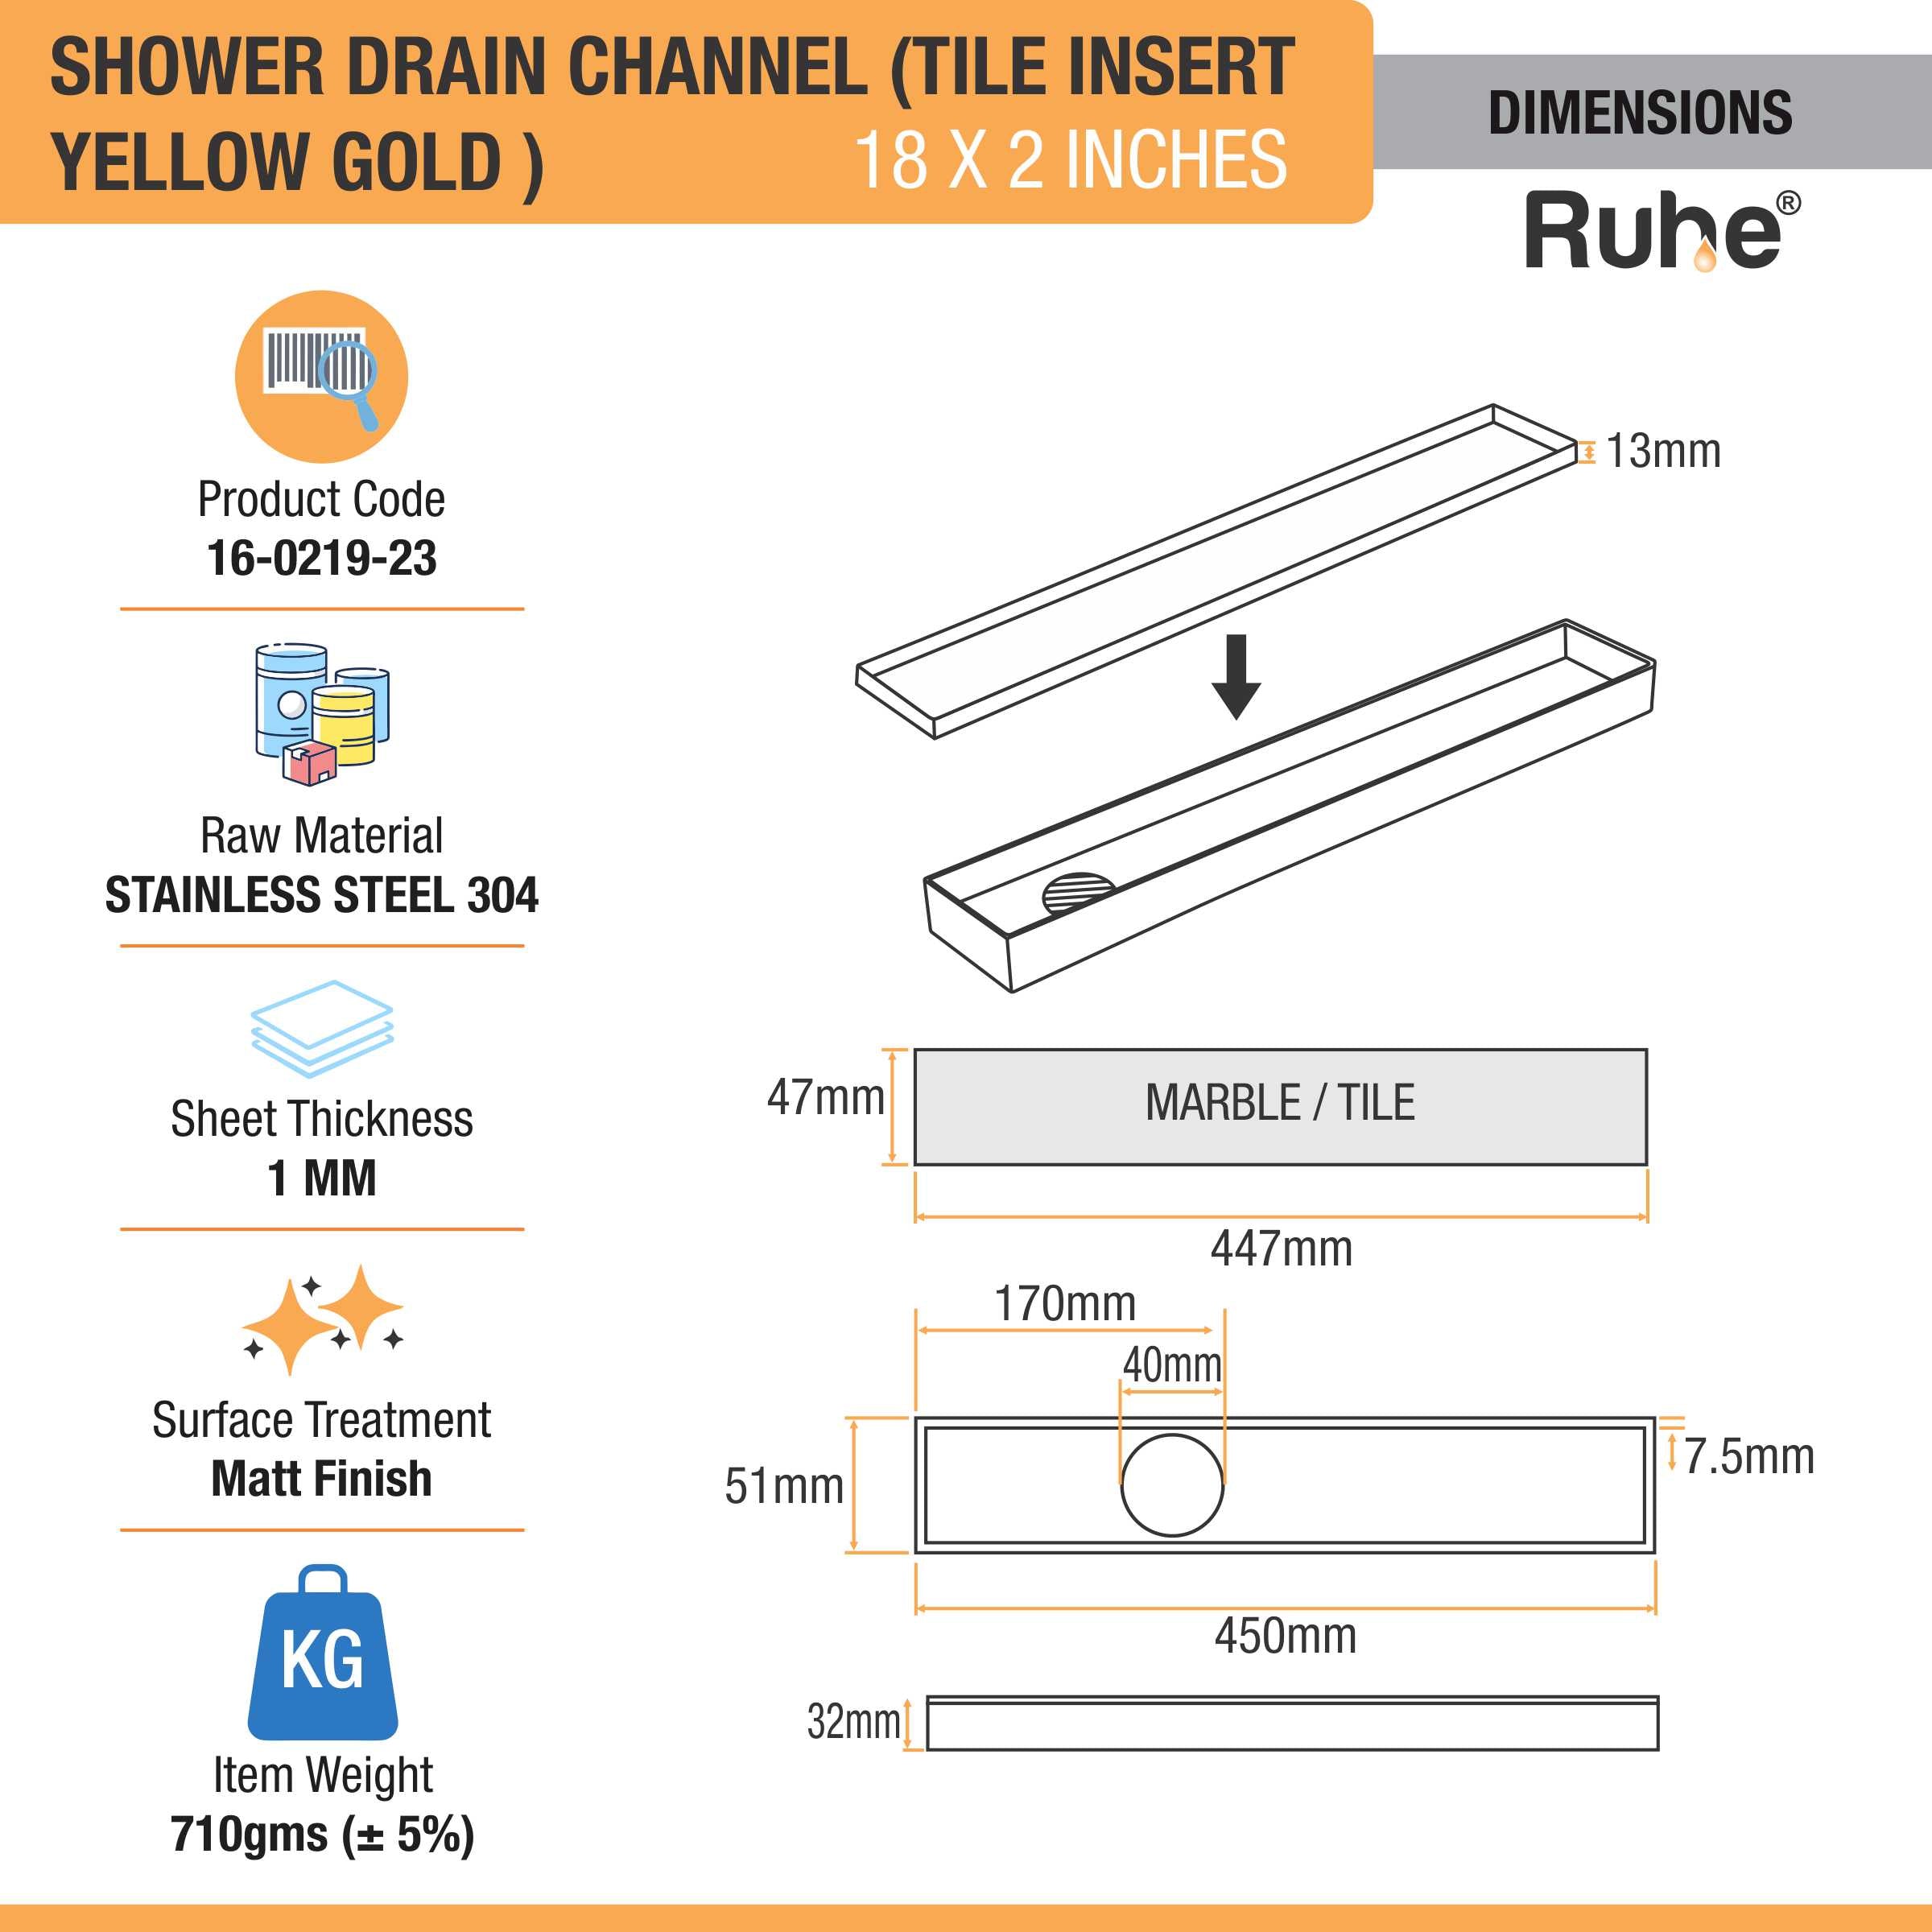 Tile Insert Shower Drain Channel (18 x 2 Inches) YELLOW GOLD dimensions and size